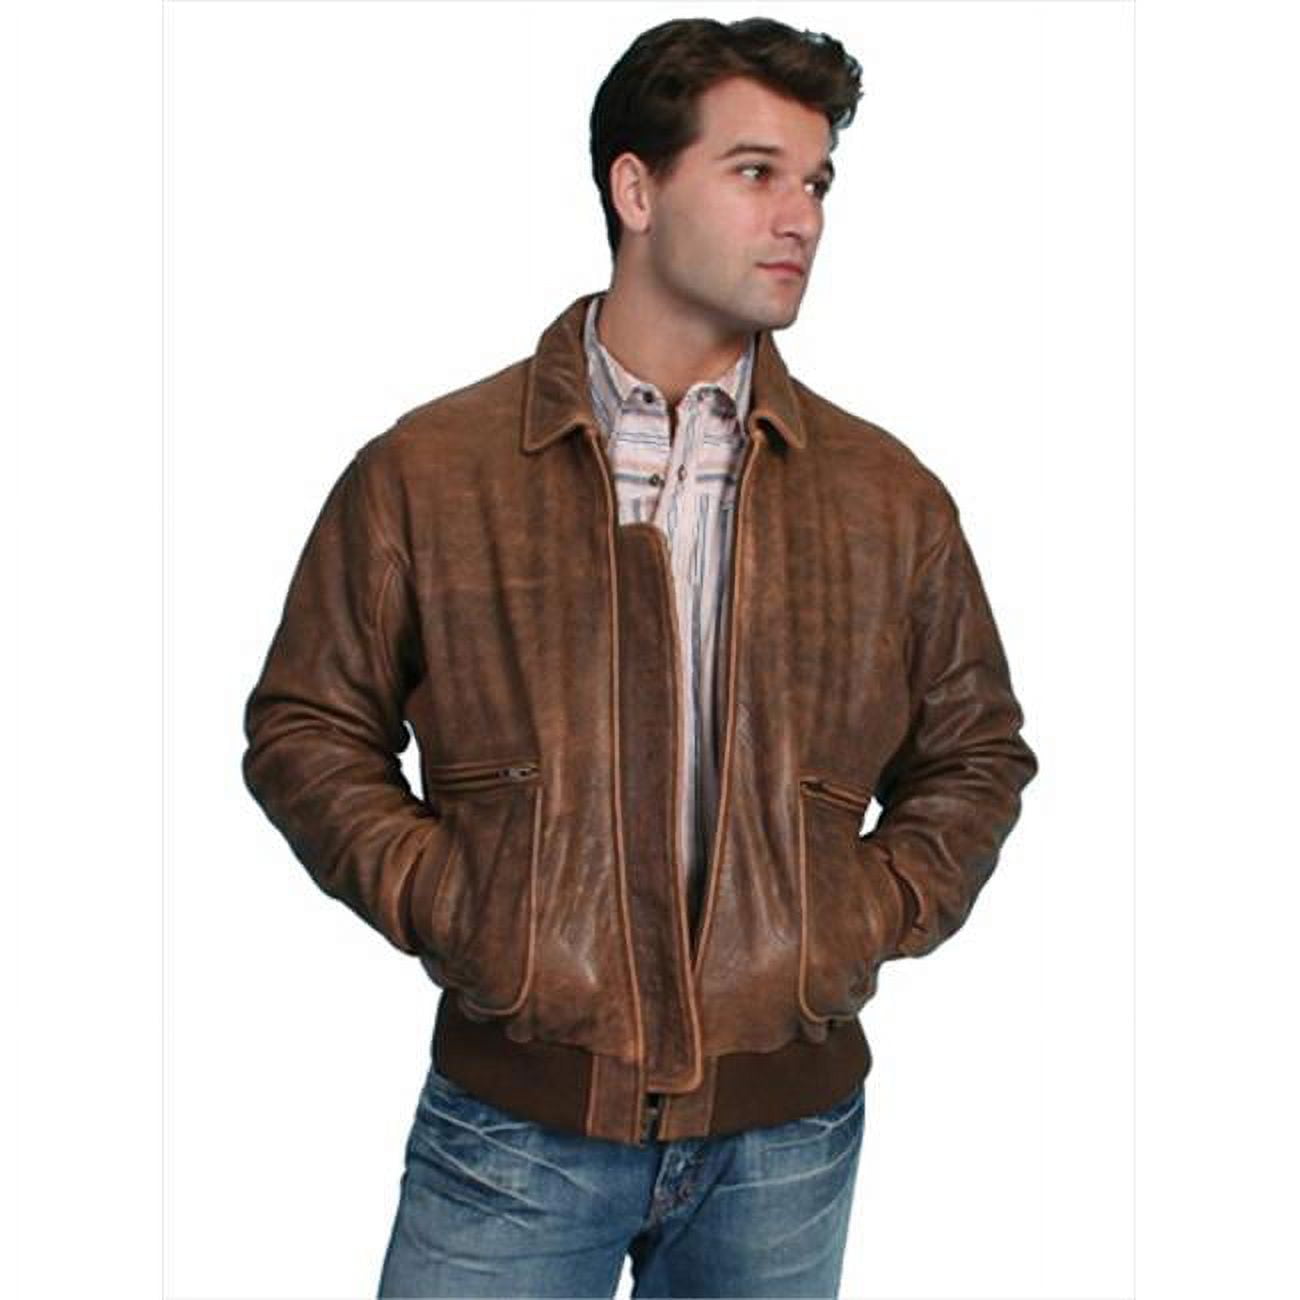 Scully 714-12-XL Mens Leather Wear Lambskin Bomber Jacket, Brown ...